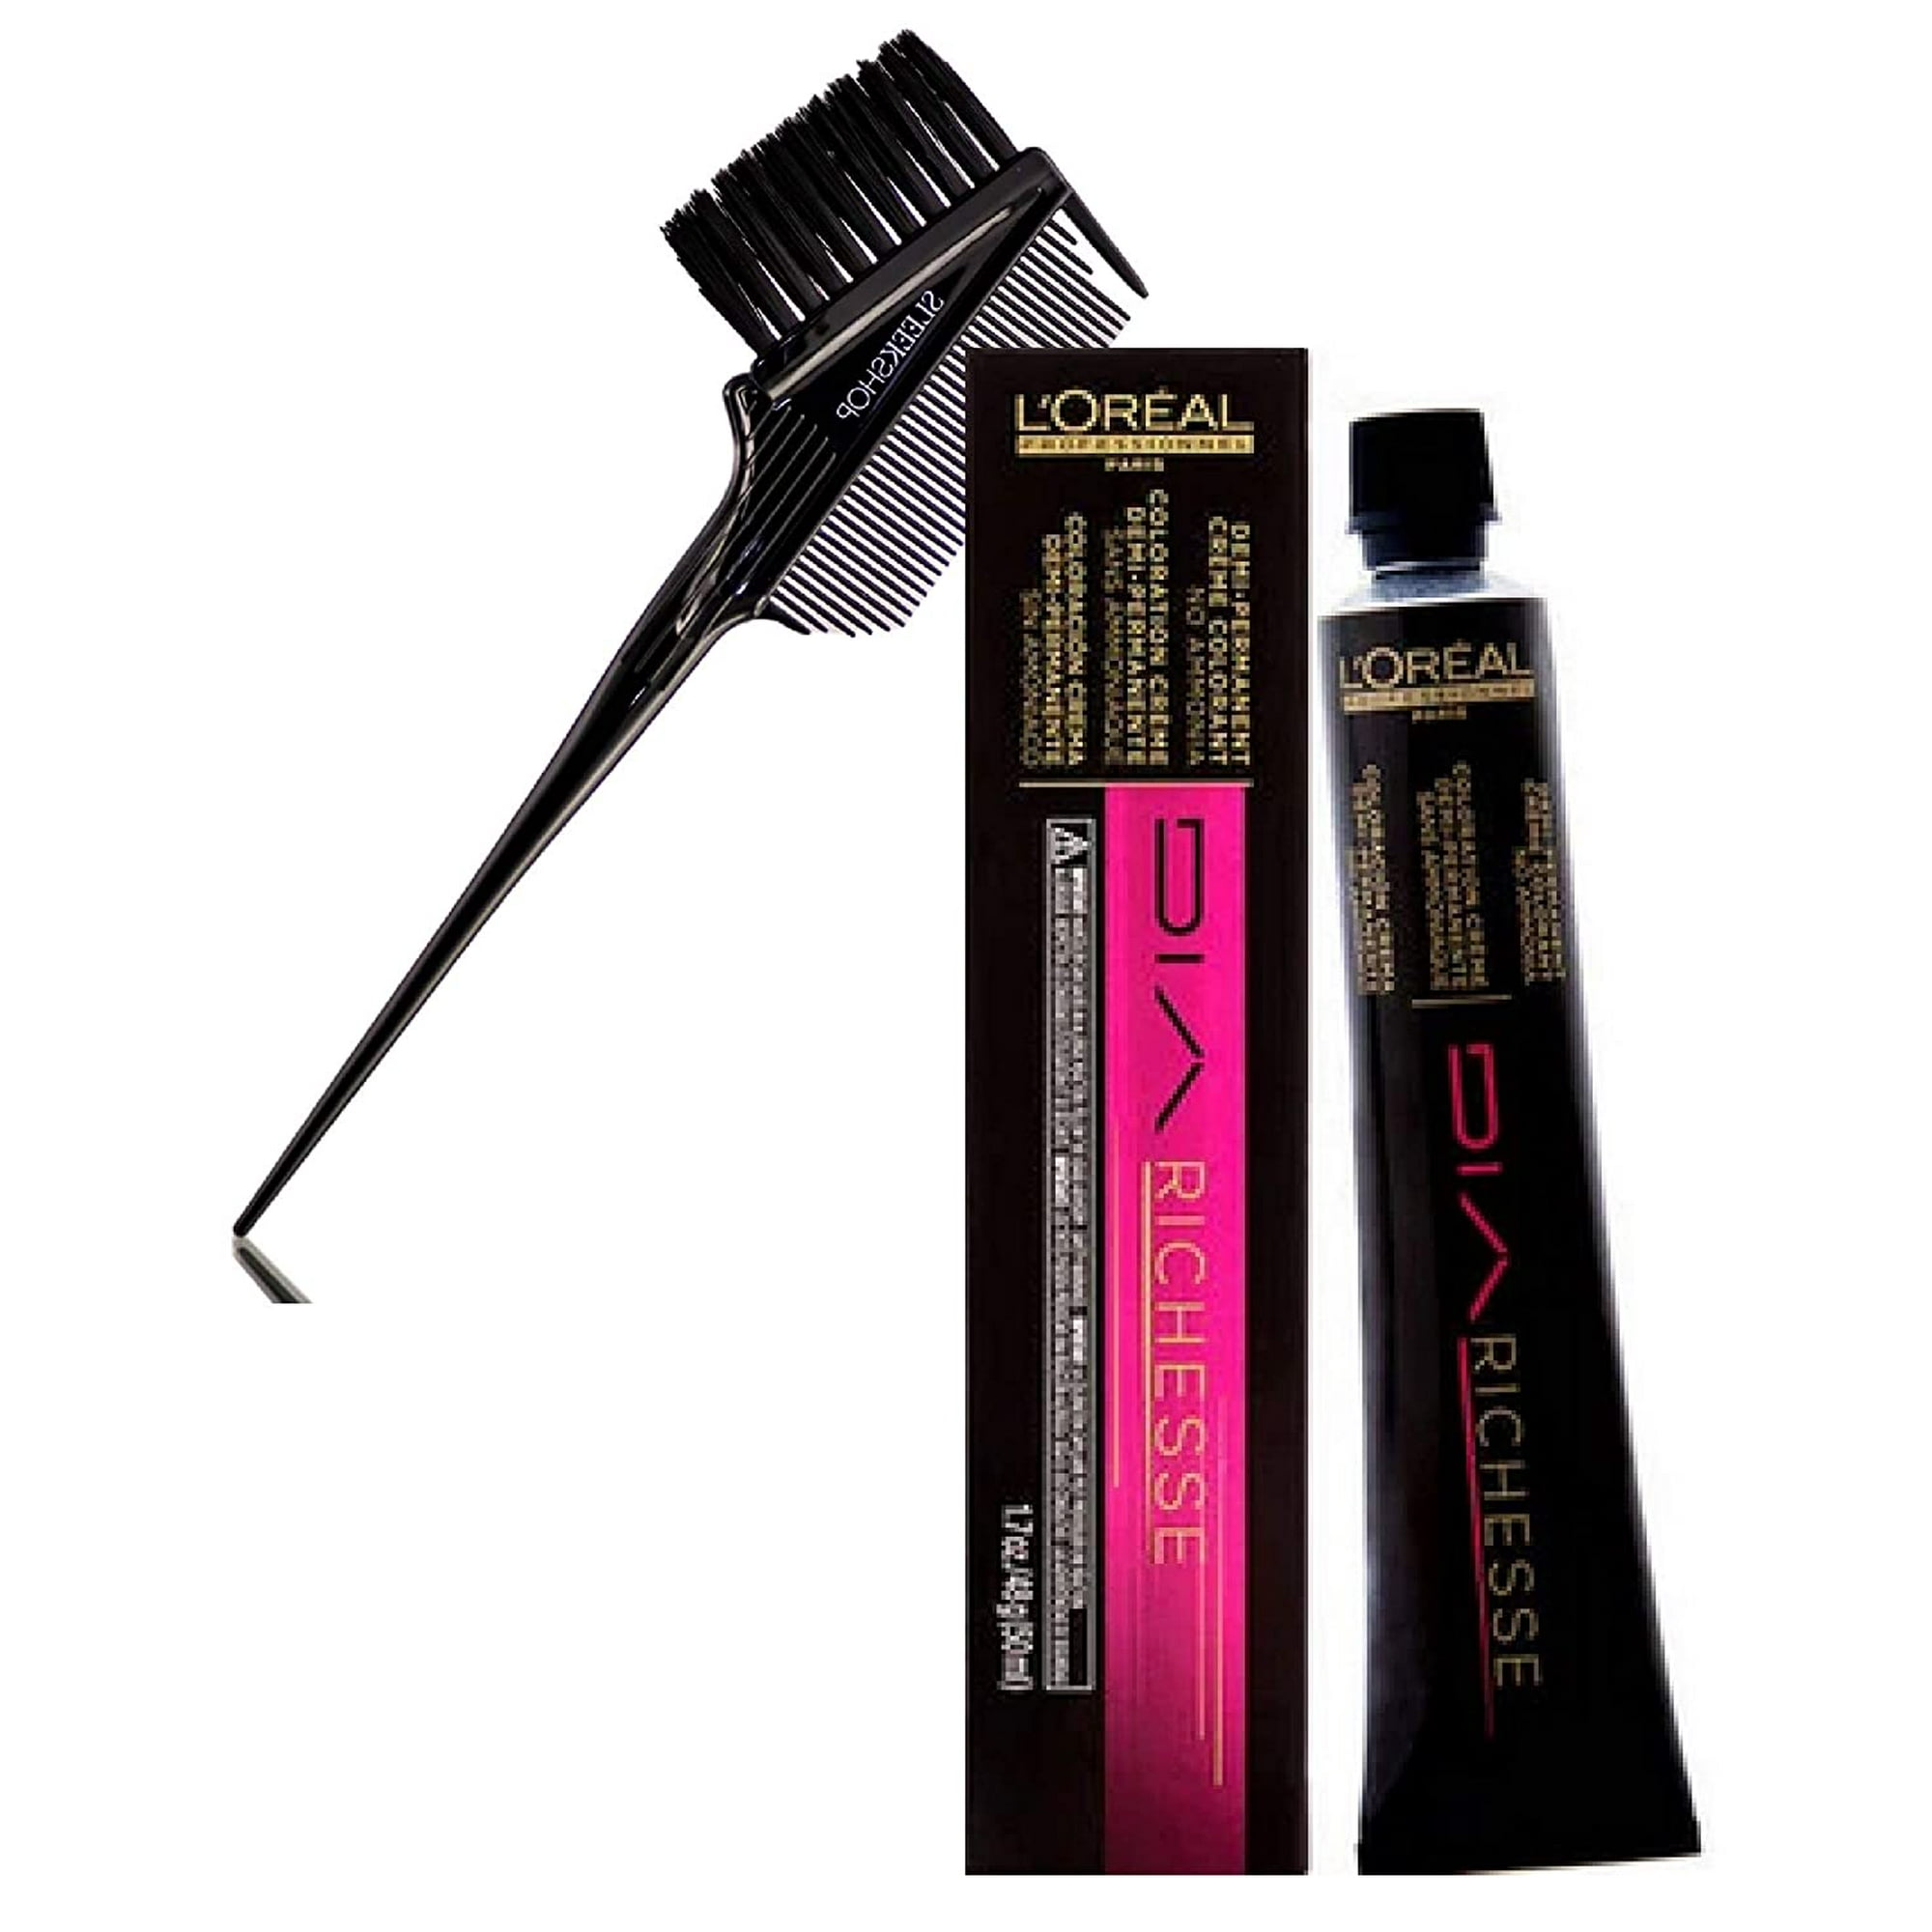 Clear , L'oreal Pro DIA RICHESSE Demi-Permanent Tone-on-Tone Creme Hair  Color Dye, Ammonia-Free Loreal Cream Haircolor - Pack of 2 w/ SLEEK 3-in-1  Comb Brush 